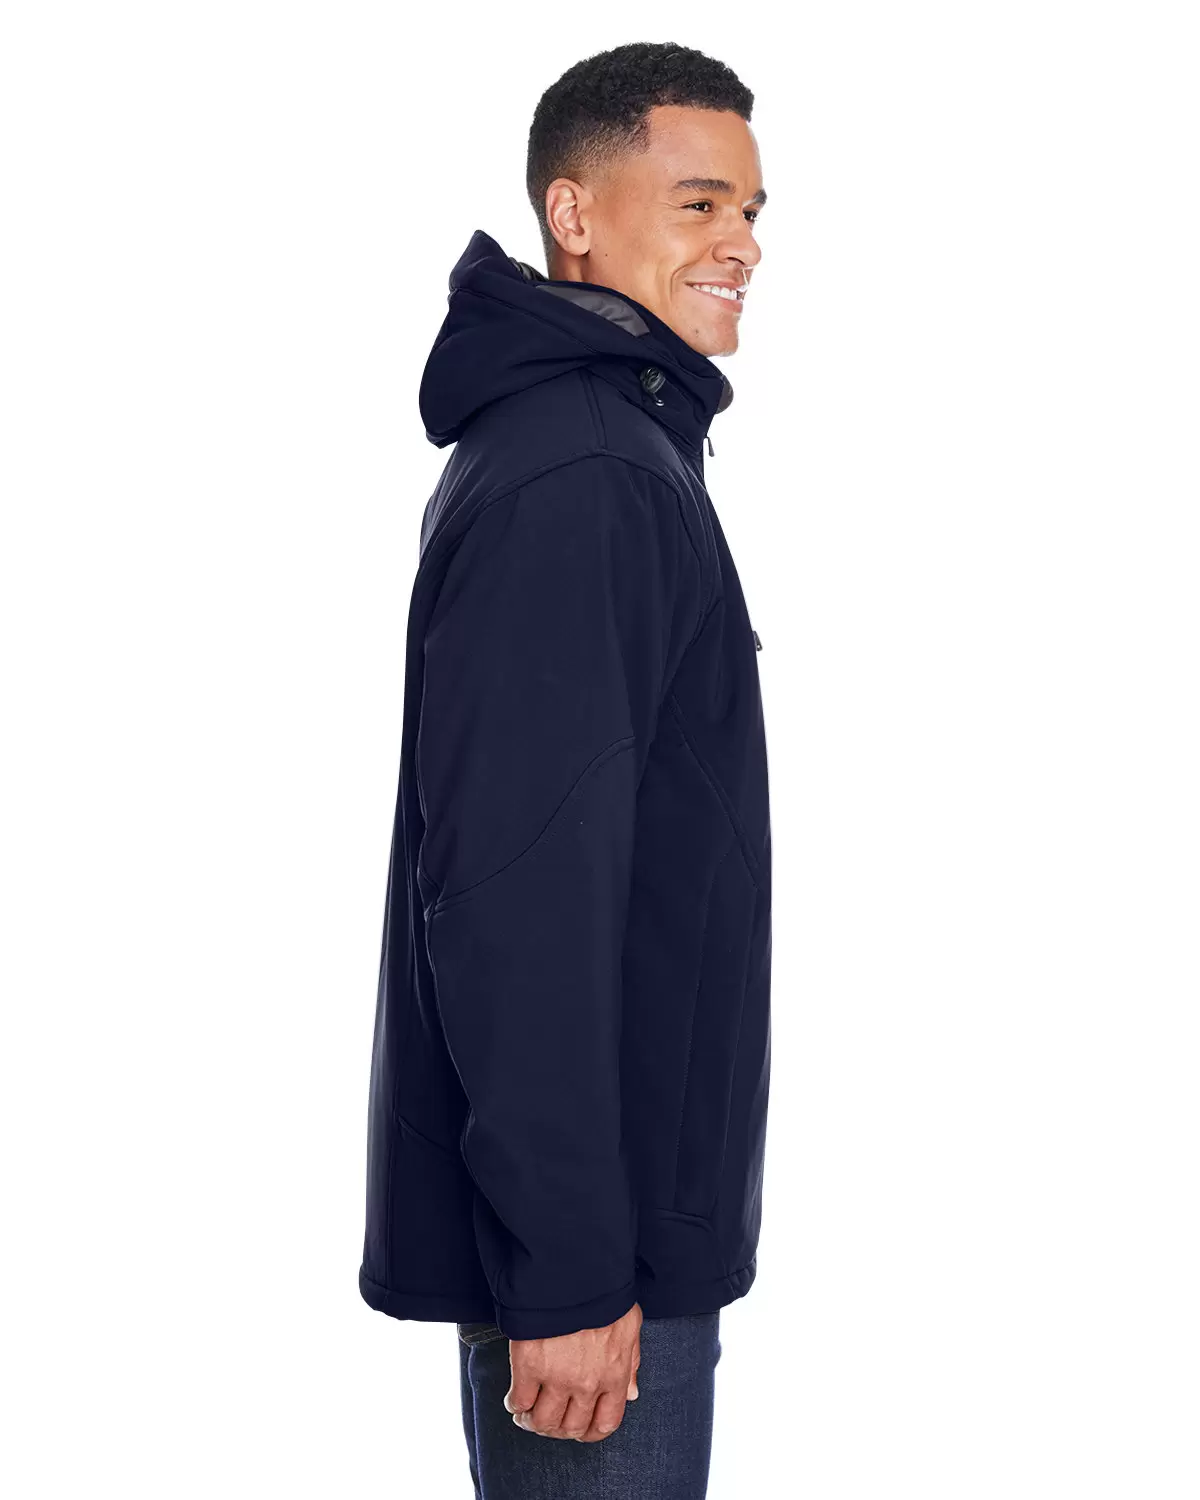 North End 88159 Men's Glacier Insulated Three-Layer Fleece Bonded Soft  Shell Jacket with Detachable Hood - From $70.58